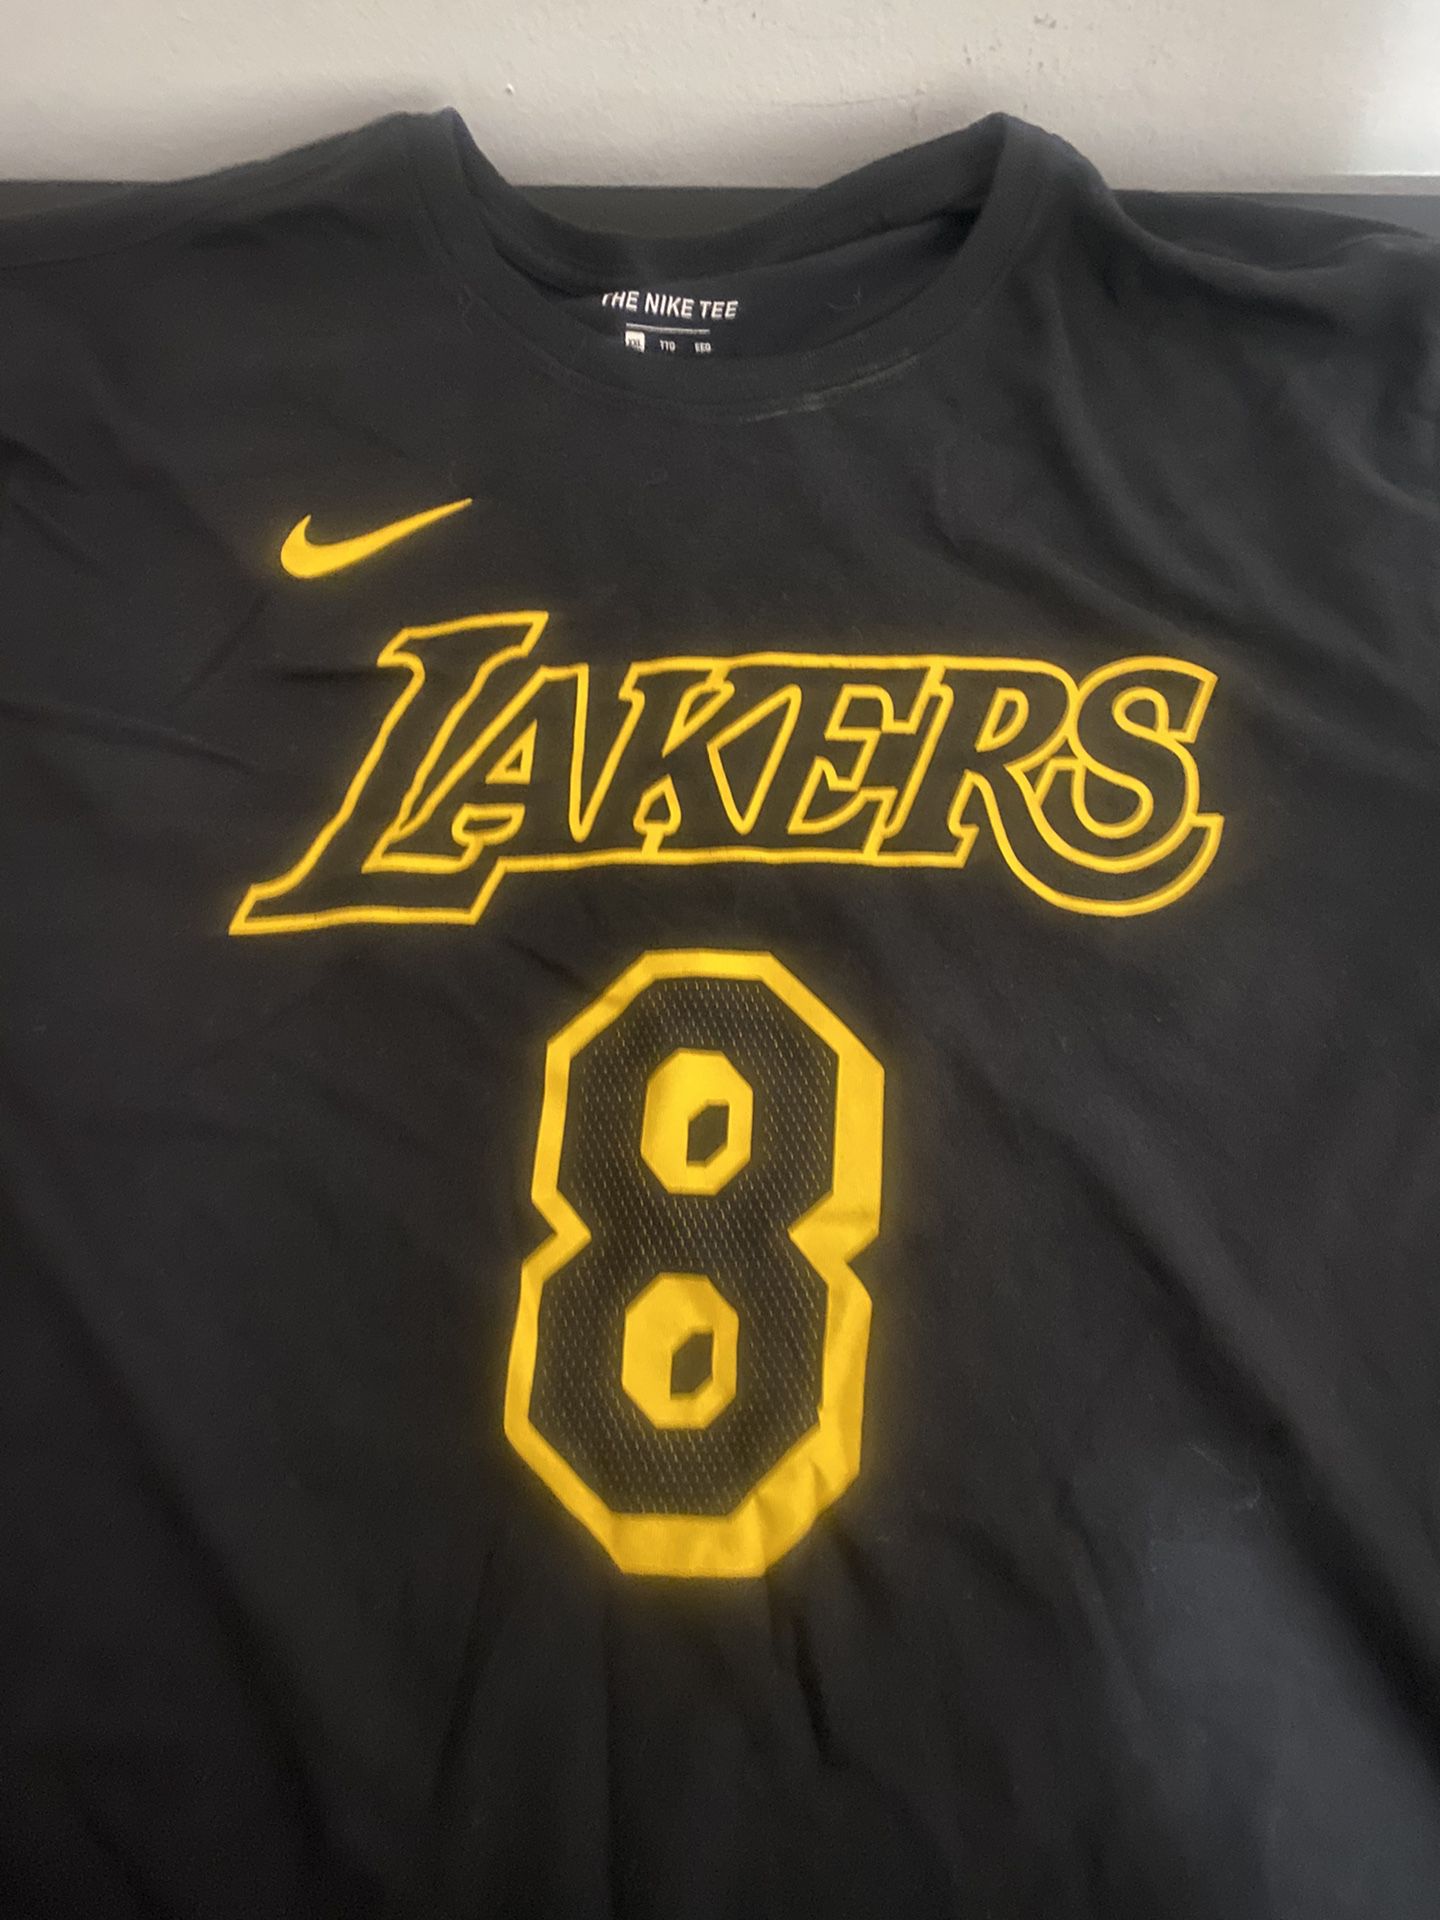 NIKE KOBE BRYANT 5 RINGS “WELCOME TO LA” LOS ANGELES LAKERS T-SHIRT LARGE  for Sale in San Fernando, CA - OfferUp